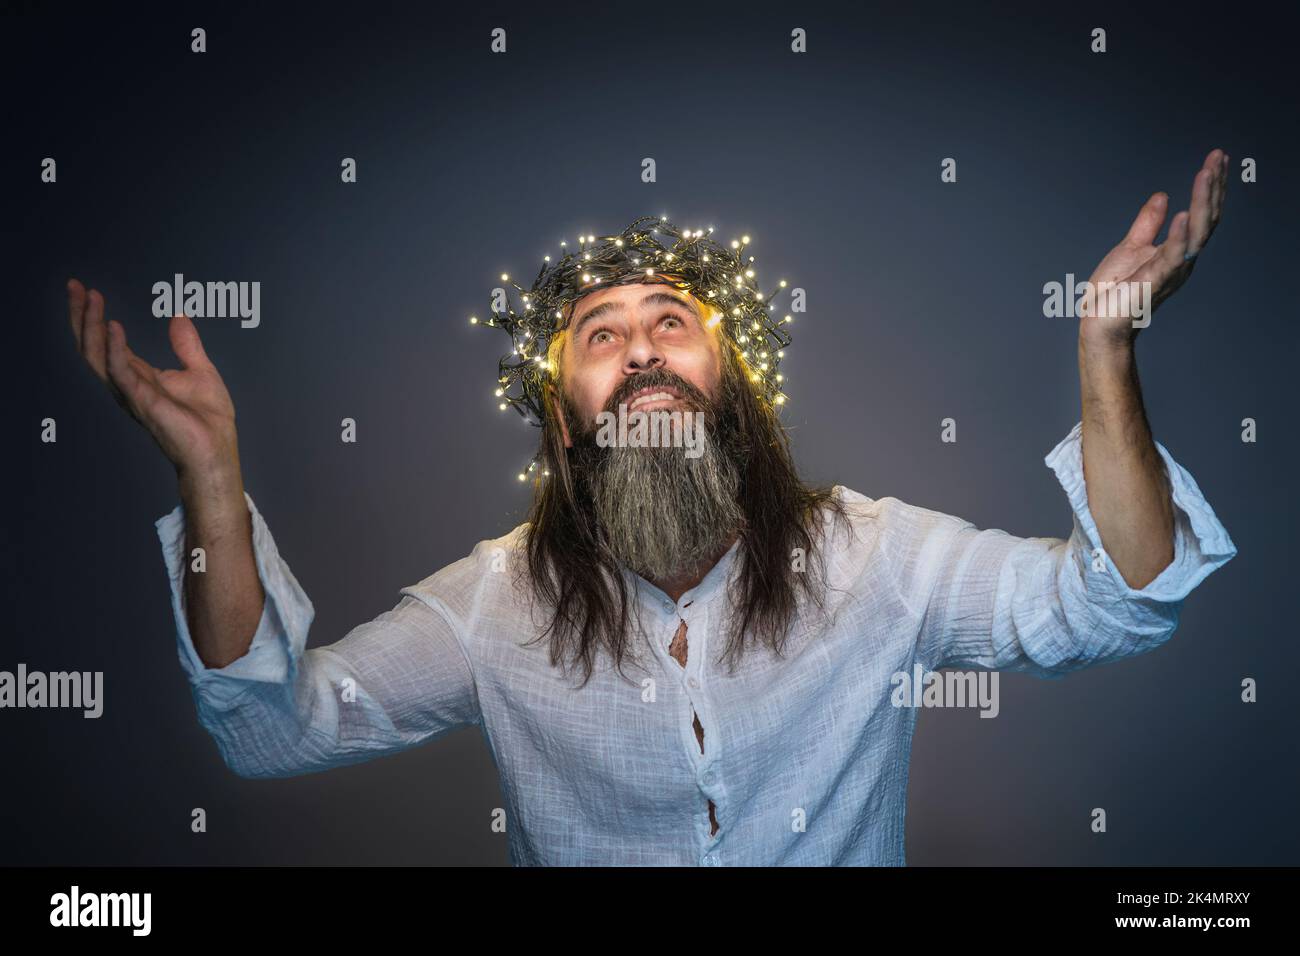 man with crown of led lights and raised arms with beard and long hair Stock Photo